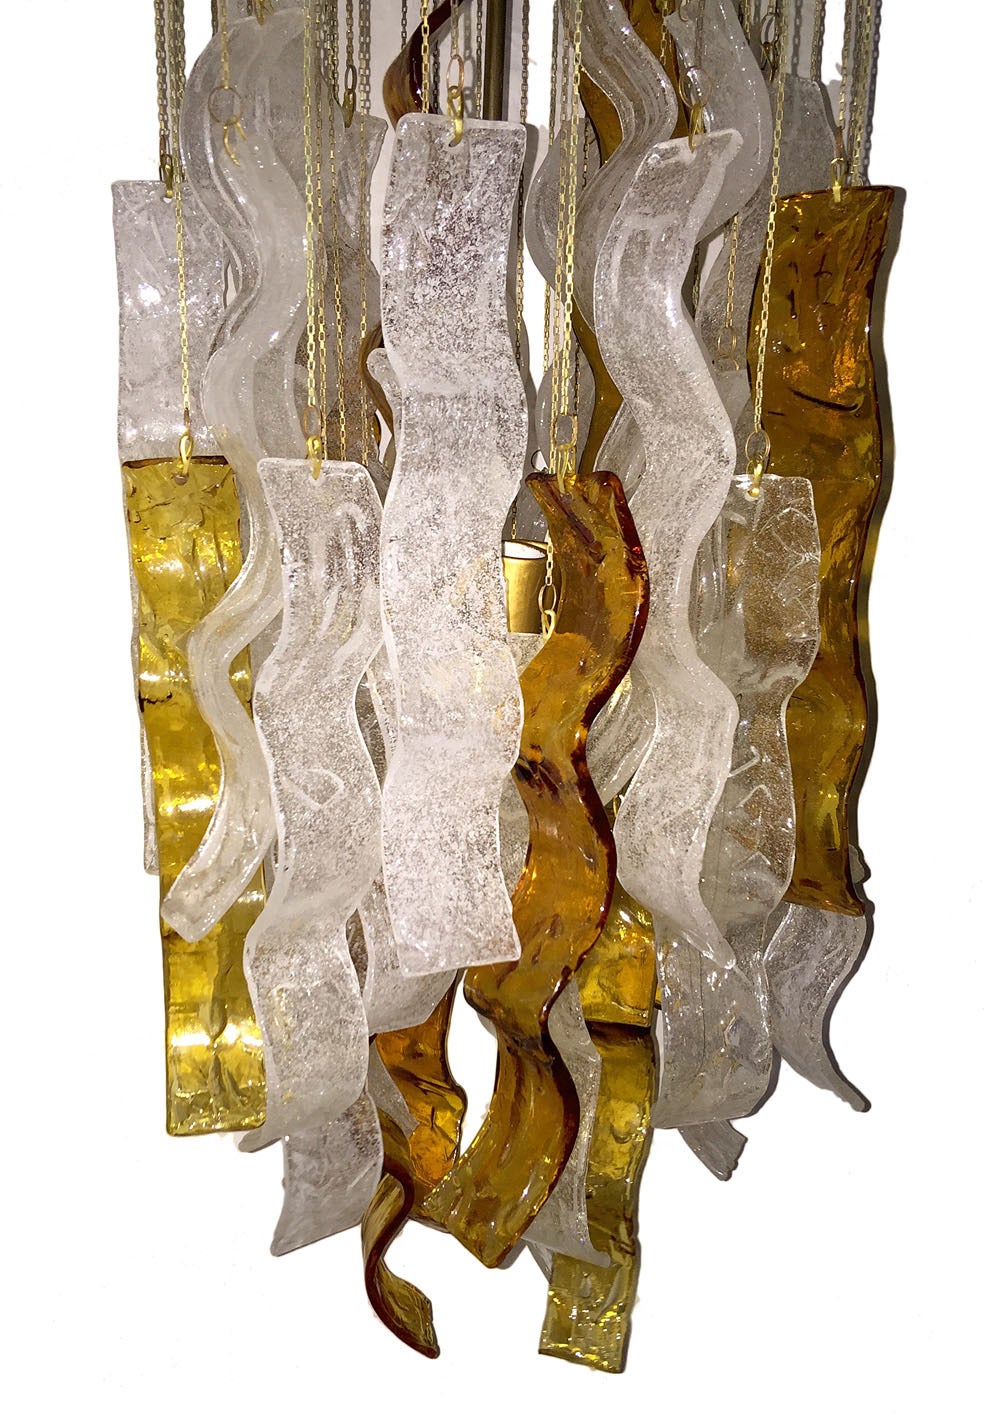 A circa 1960 Italian moderne style glass light fixture with clear and amber glass.

Measurements:
16